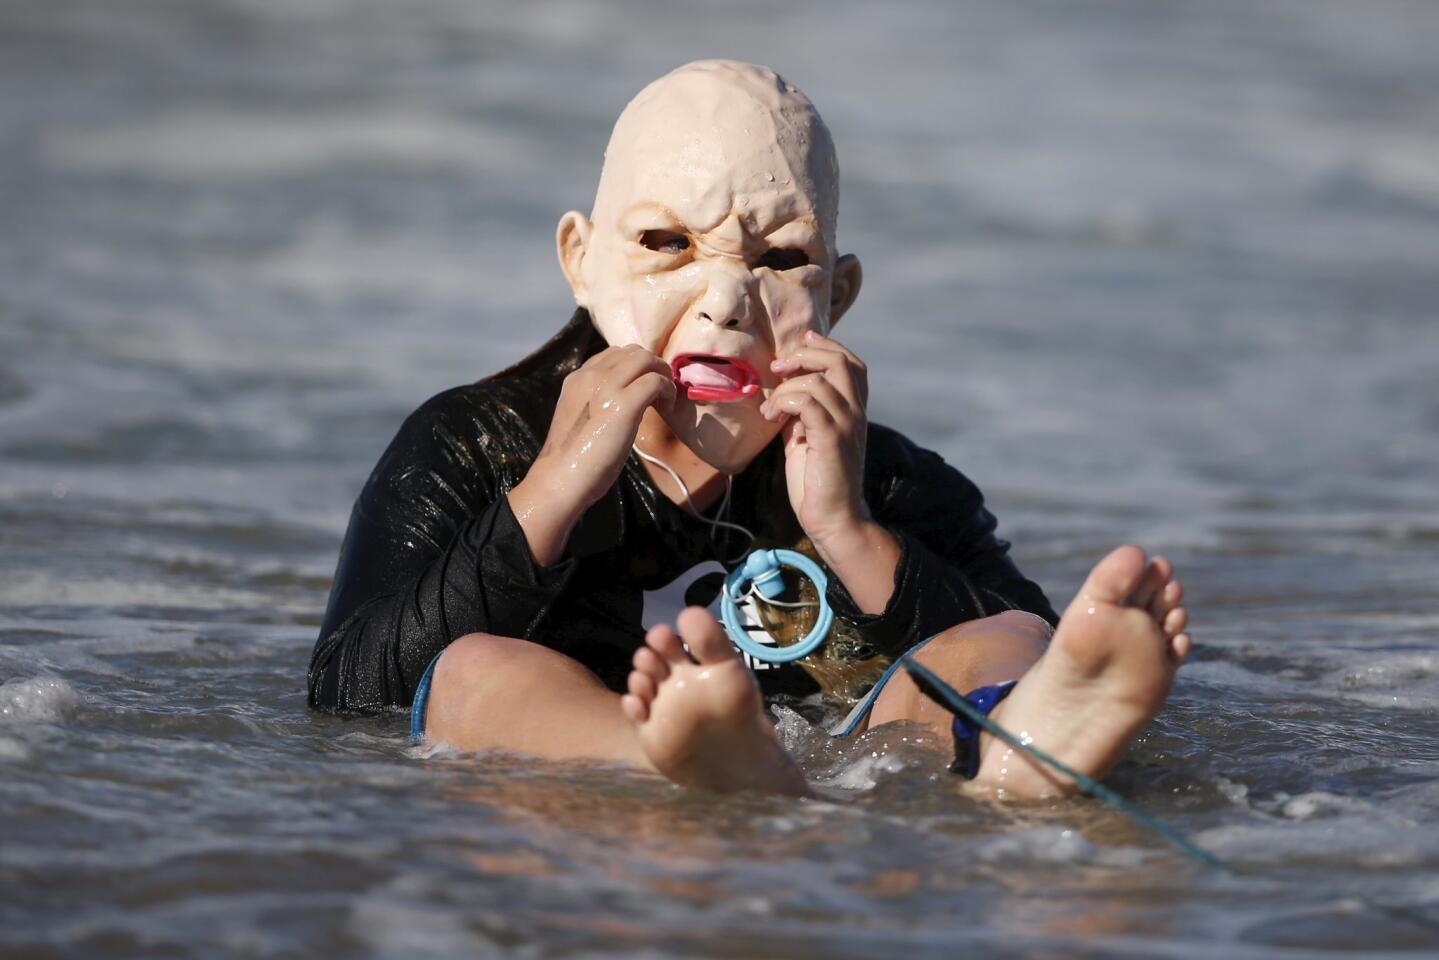 Joey Callhehan, 13, competes dressed as a baby during the ZJ Boarding House Haunted Heats Halloween Surf Contest in Santa Monica